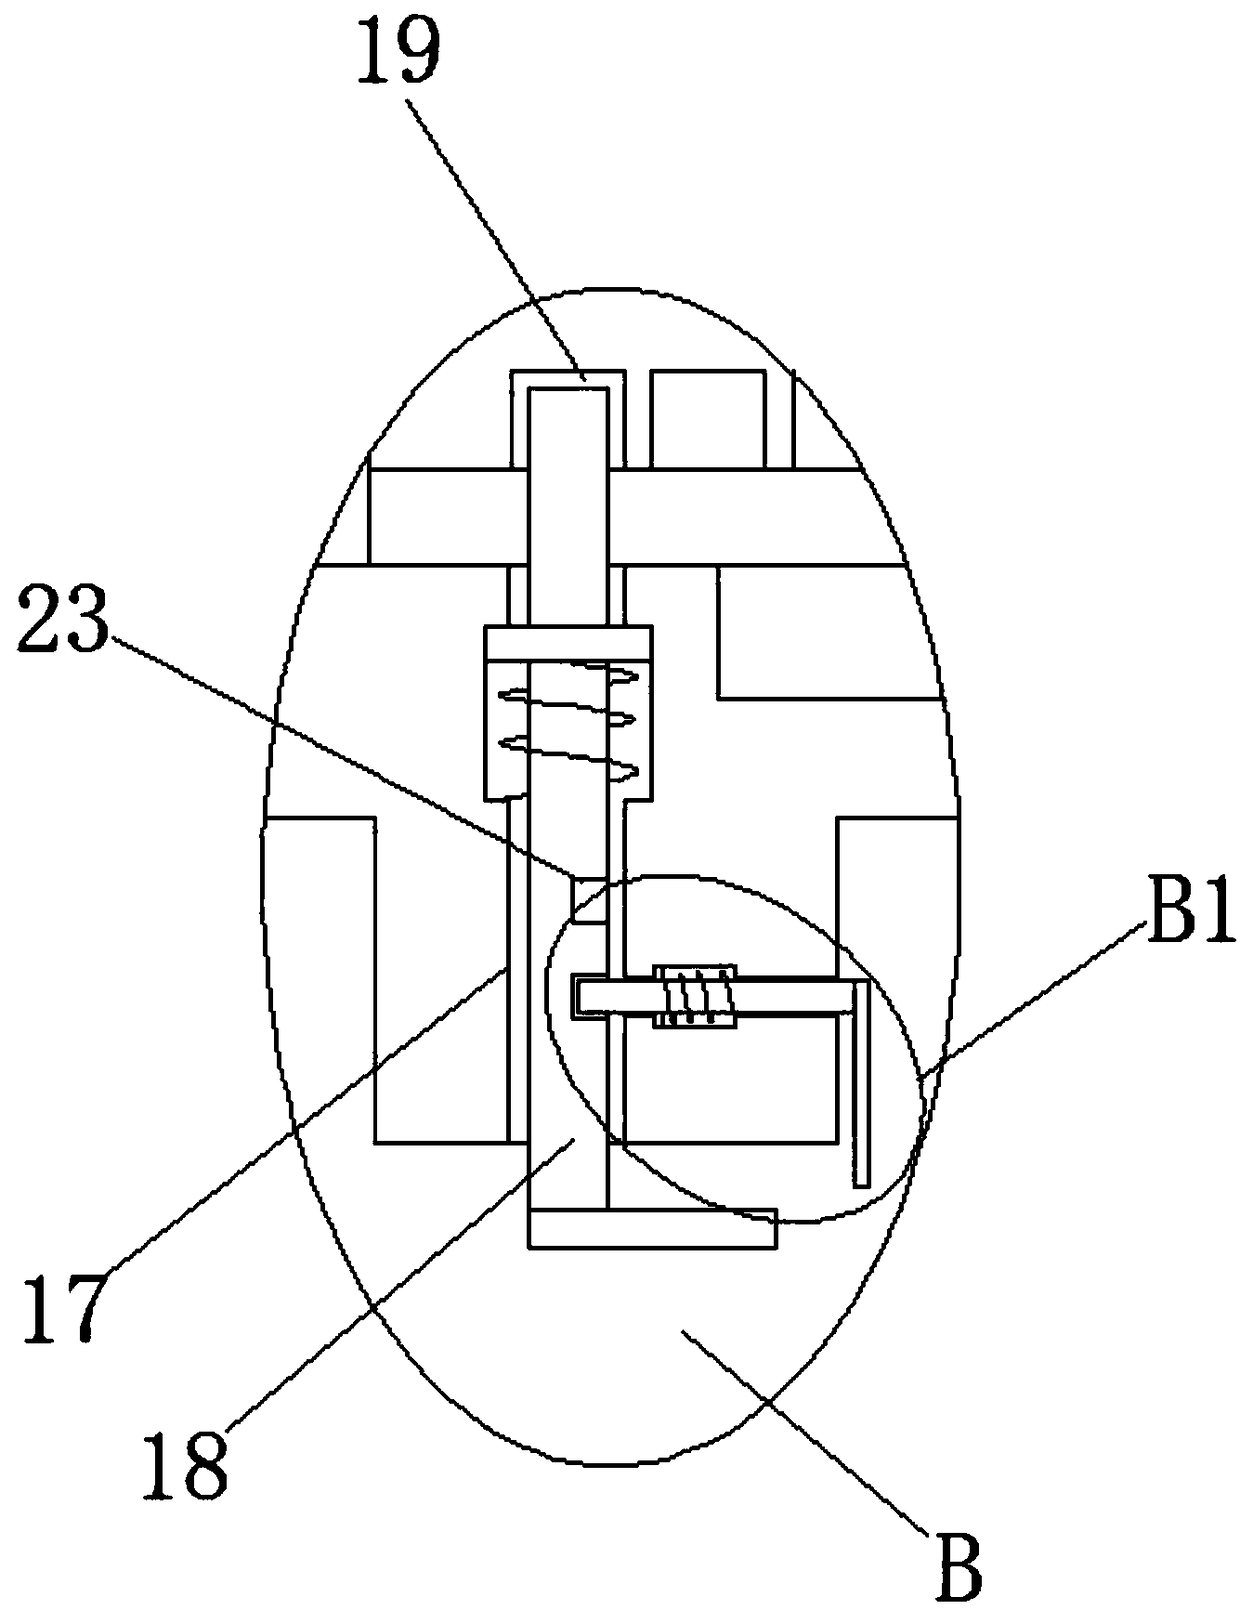 Clinical vaginal secretion sampling device for obstetrics and gynecology